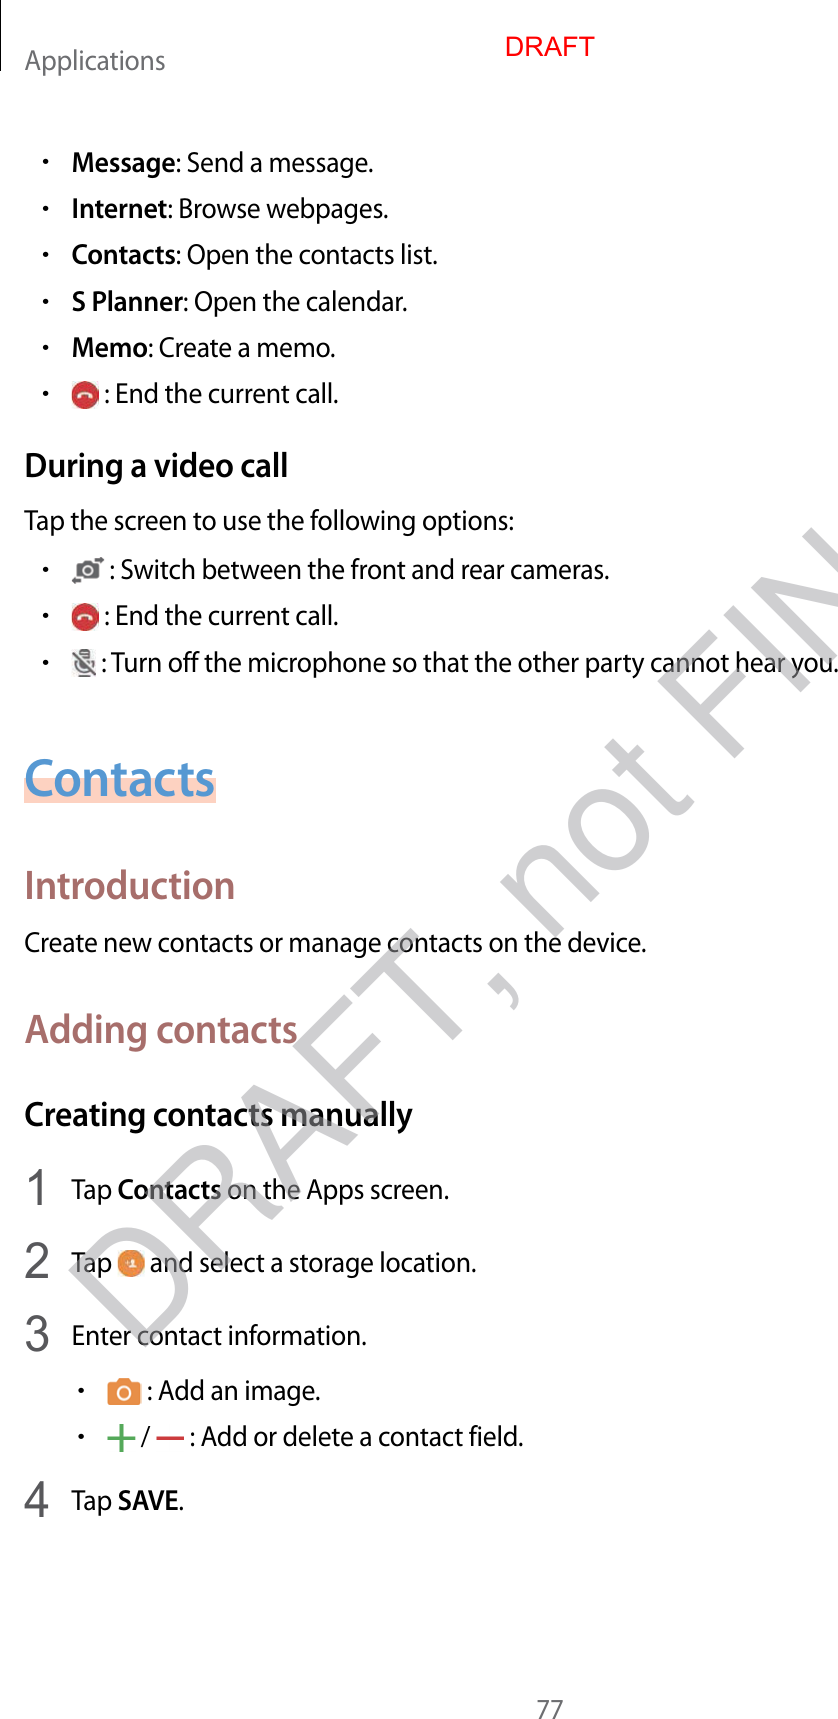 Applications77•Message: Send a message.•Internet: Browse webpages.•Contacts: Open the contacts list.•S Planner: Open the calendar.•Memo: Create a memo.• : End the current call.During a video callTap the screen to use the following options:• : Switch between the front and rear cameras.• : End the current call.• : Turn off the microphone so that the other party cannot hear you.ContactsIntroductionCreate new contacts or manage contacts on the device.Adding contactsCreating contacts manually1  Tap Contacts on the Apps screen.2  Tap   and select a storage location.3  Enter contact information.• : Add an image.• /   : Add or delete a contact field.4  Tap SAVE.DRAFTDRAFT, not FINAL